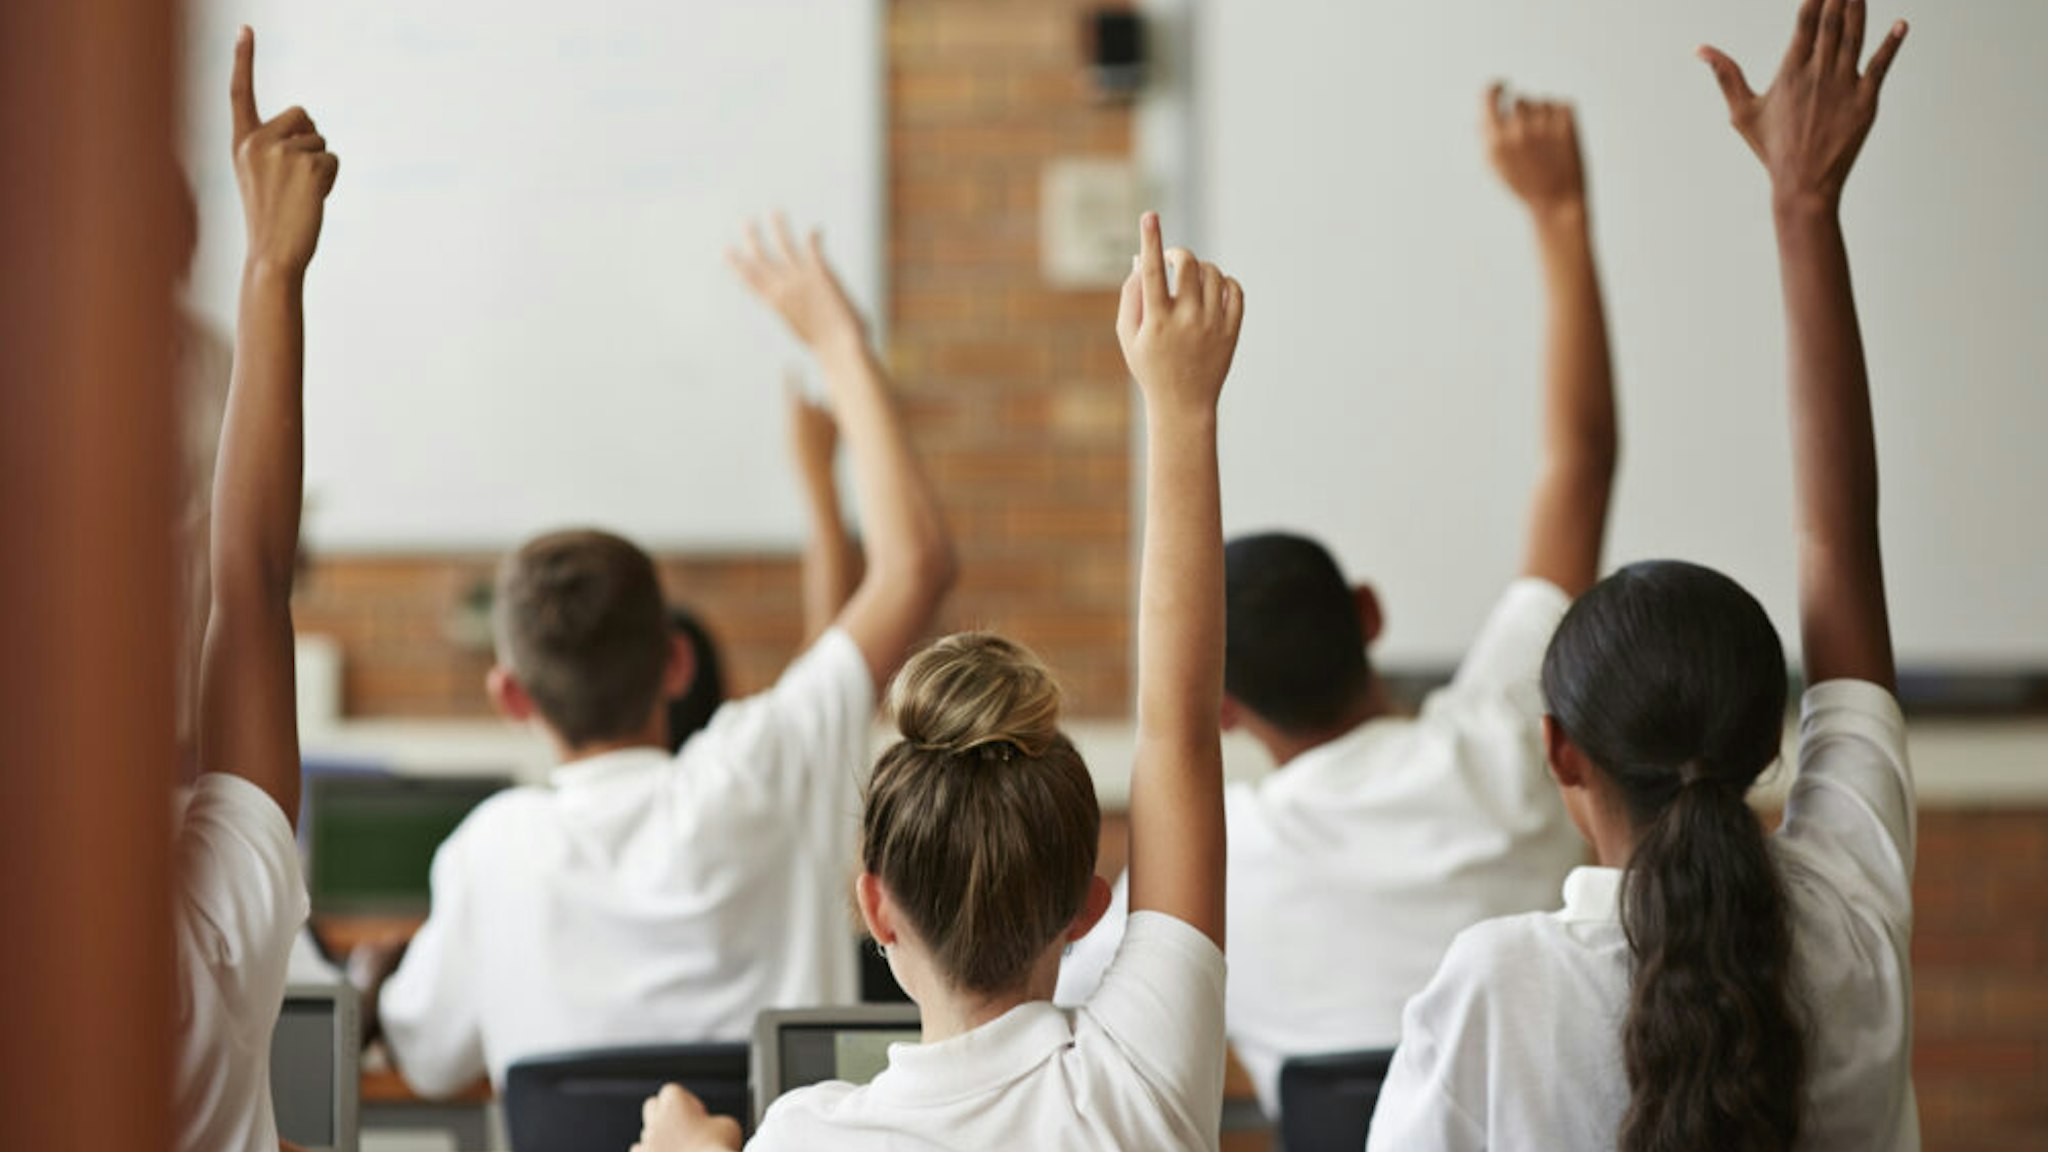 School students with raised hands, back view - stock photo